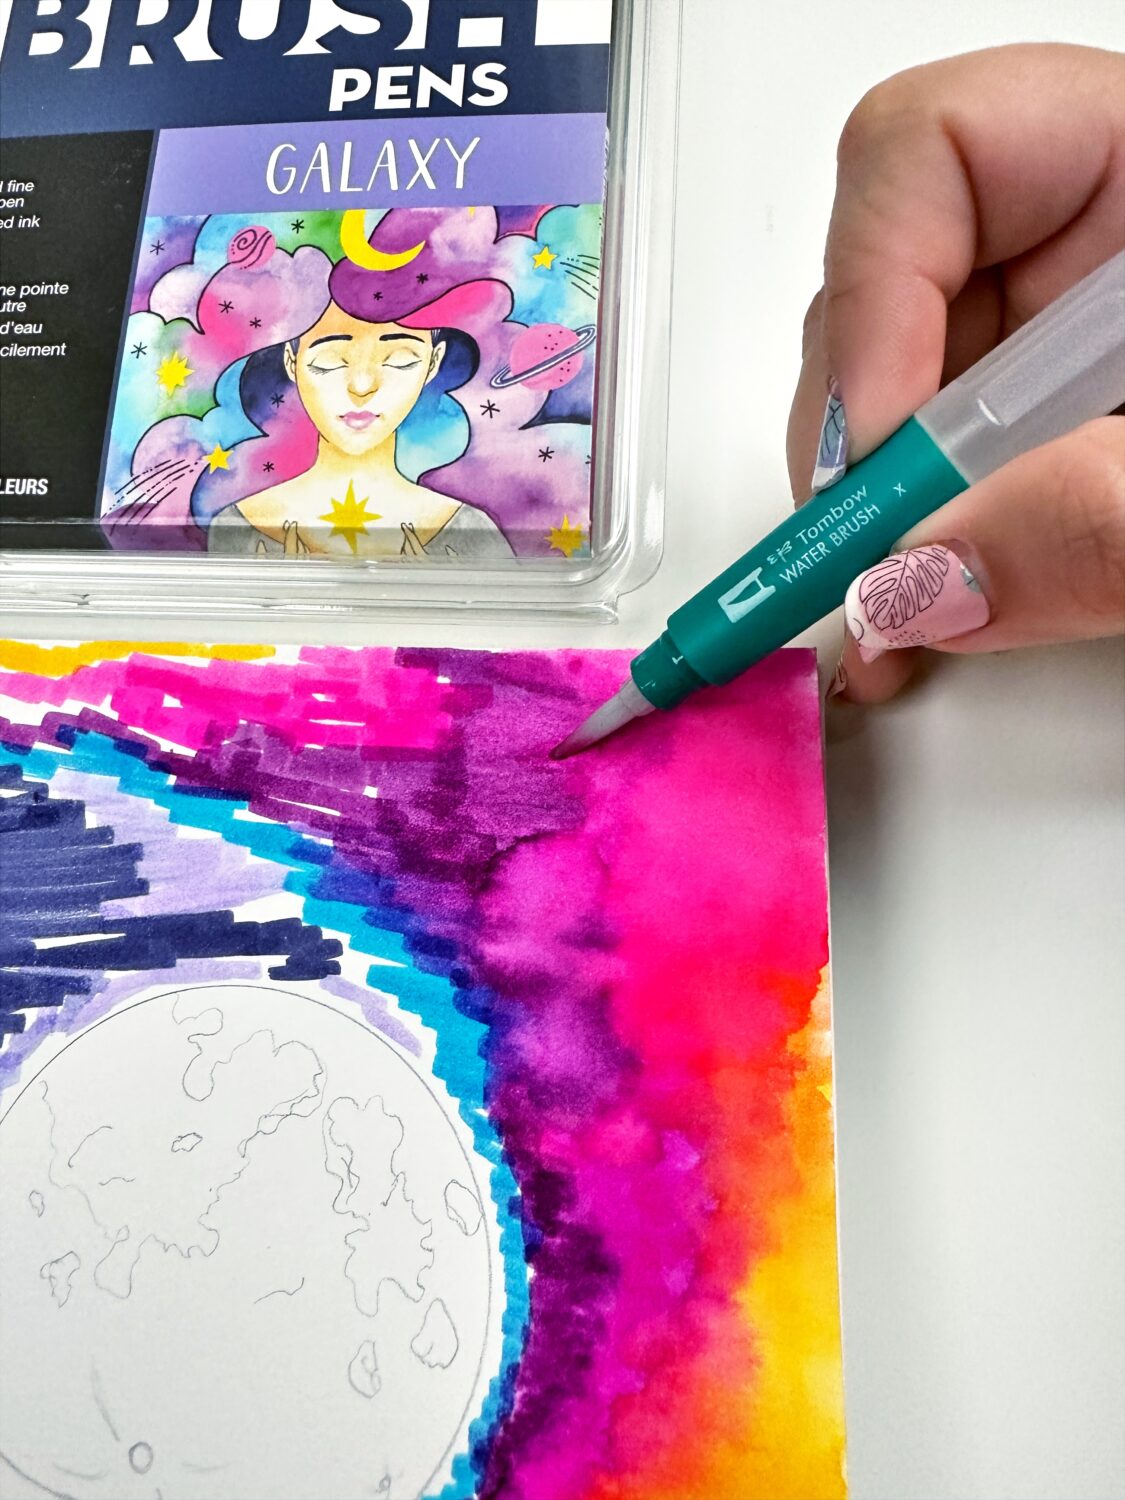 Use the Tombow Water Brush to blend the colors. #tombow #galaxy